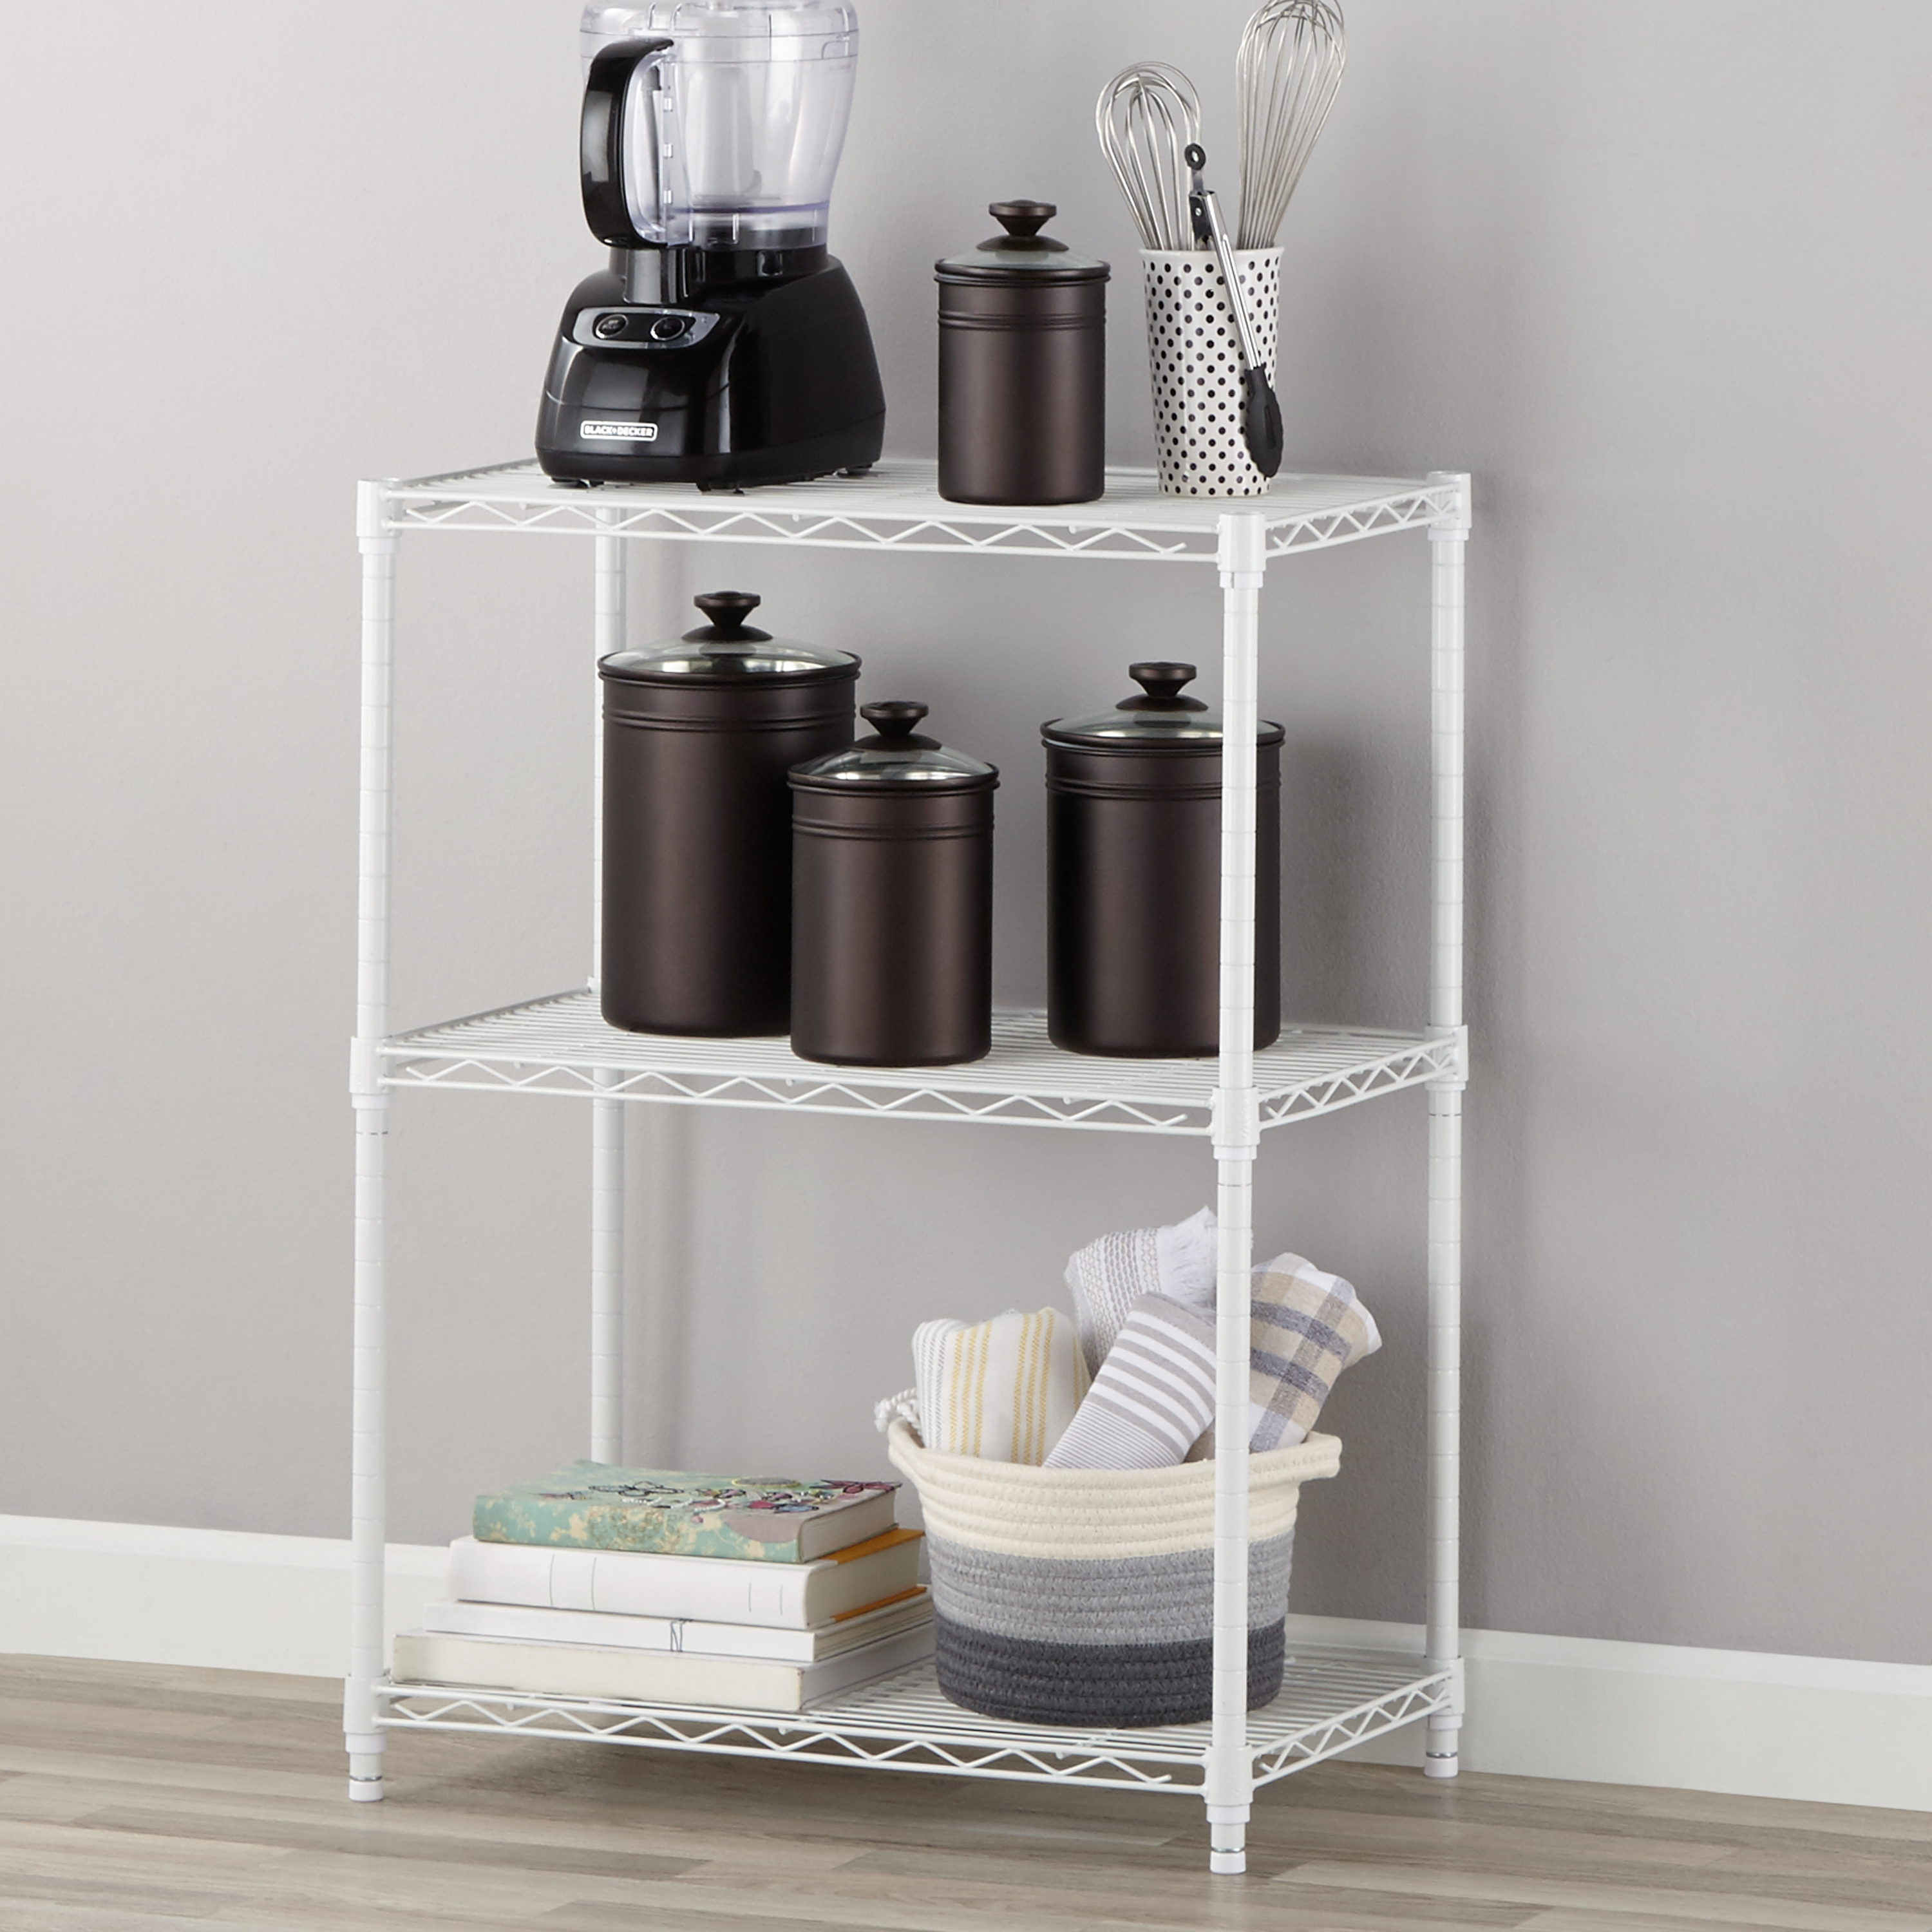 Hyper Tough 3 Tier Wire Shelving Unit,13.4"Dx23.2"Wx30.6"H, White, Weight Capacity 750 lb - image 1 of 4